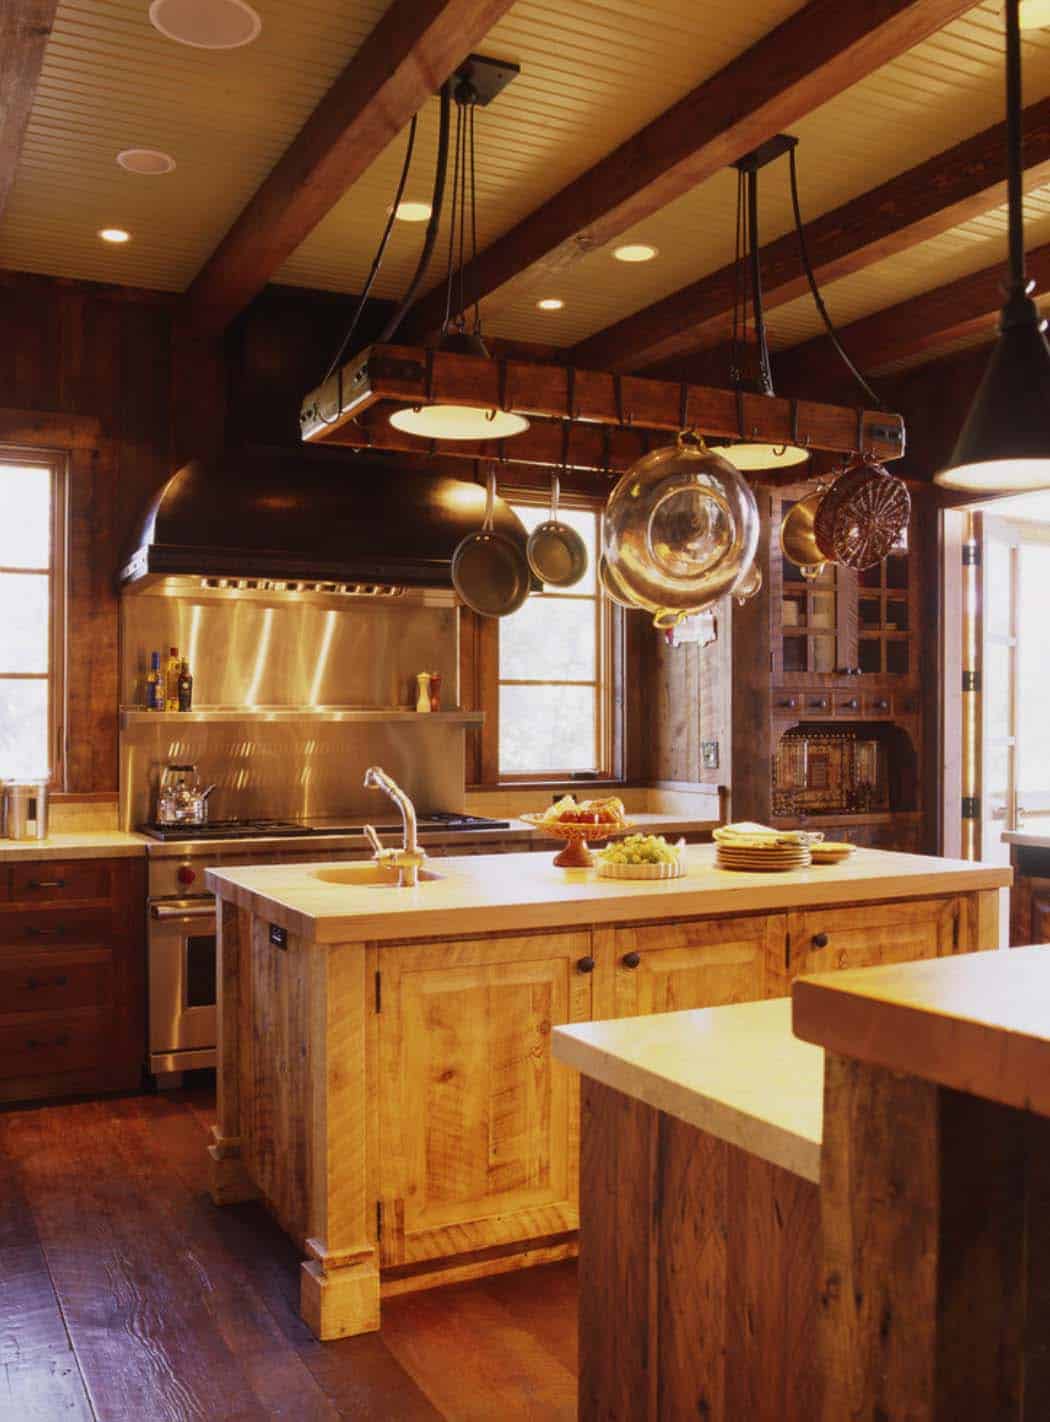 family-ranch-rustic-kitchen